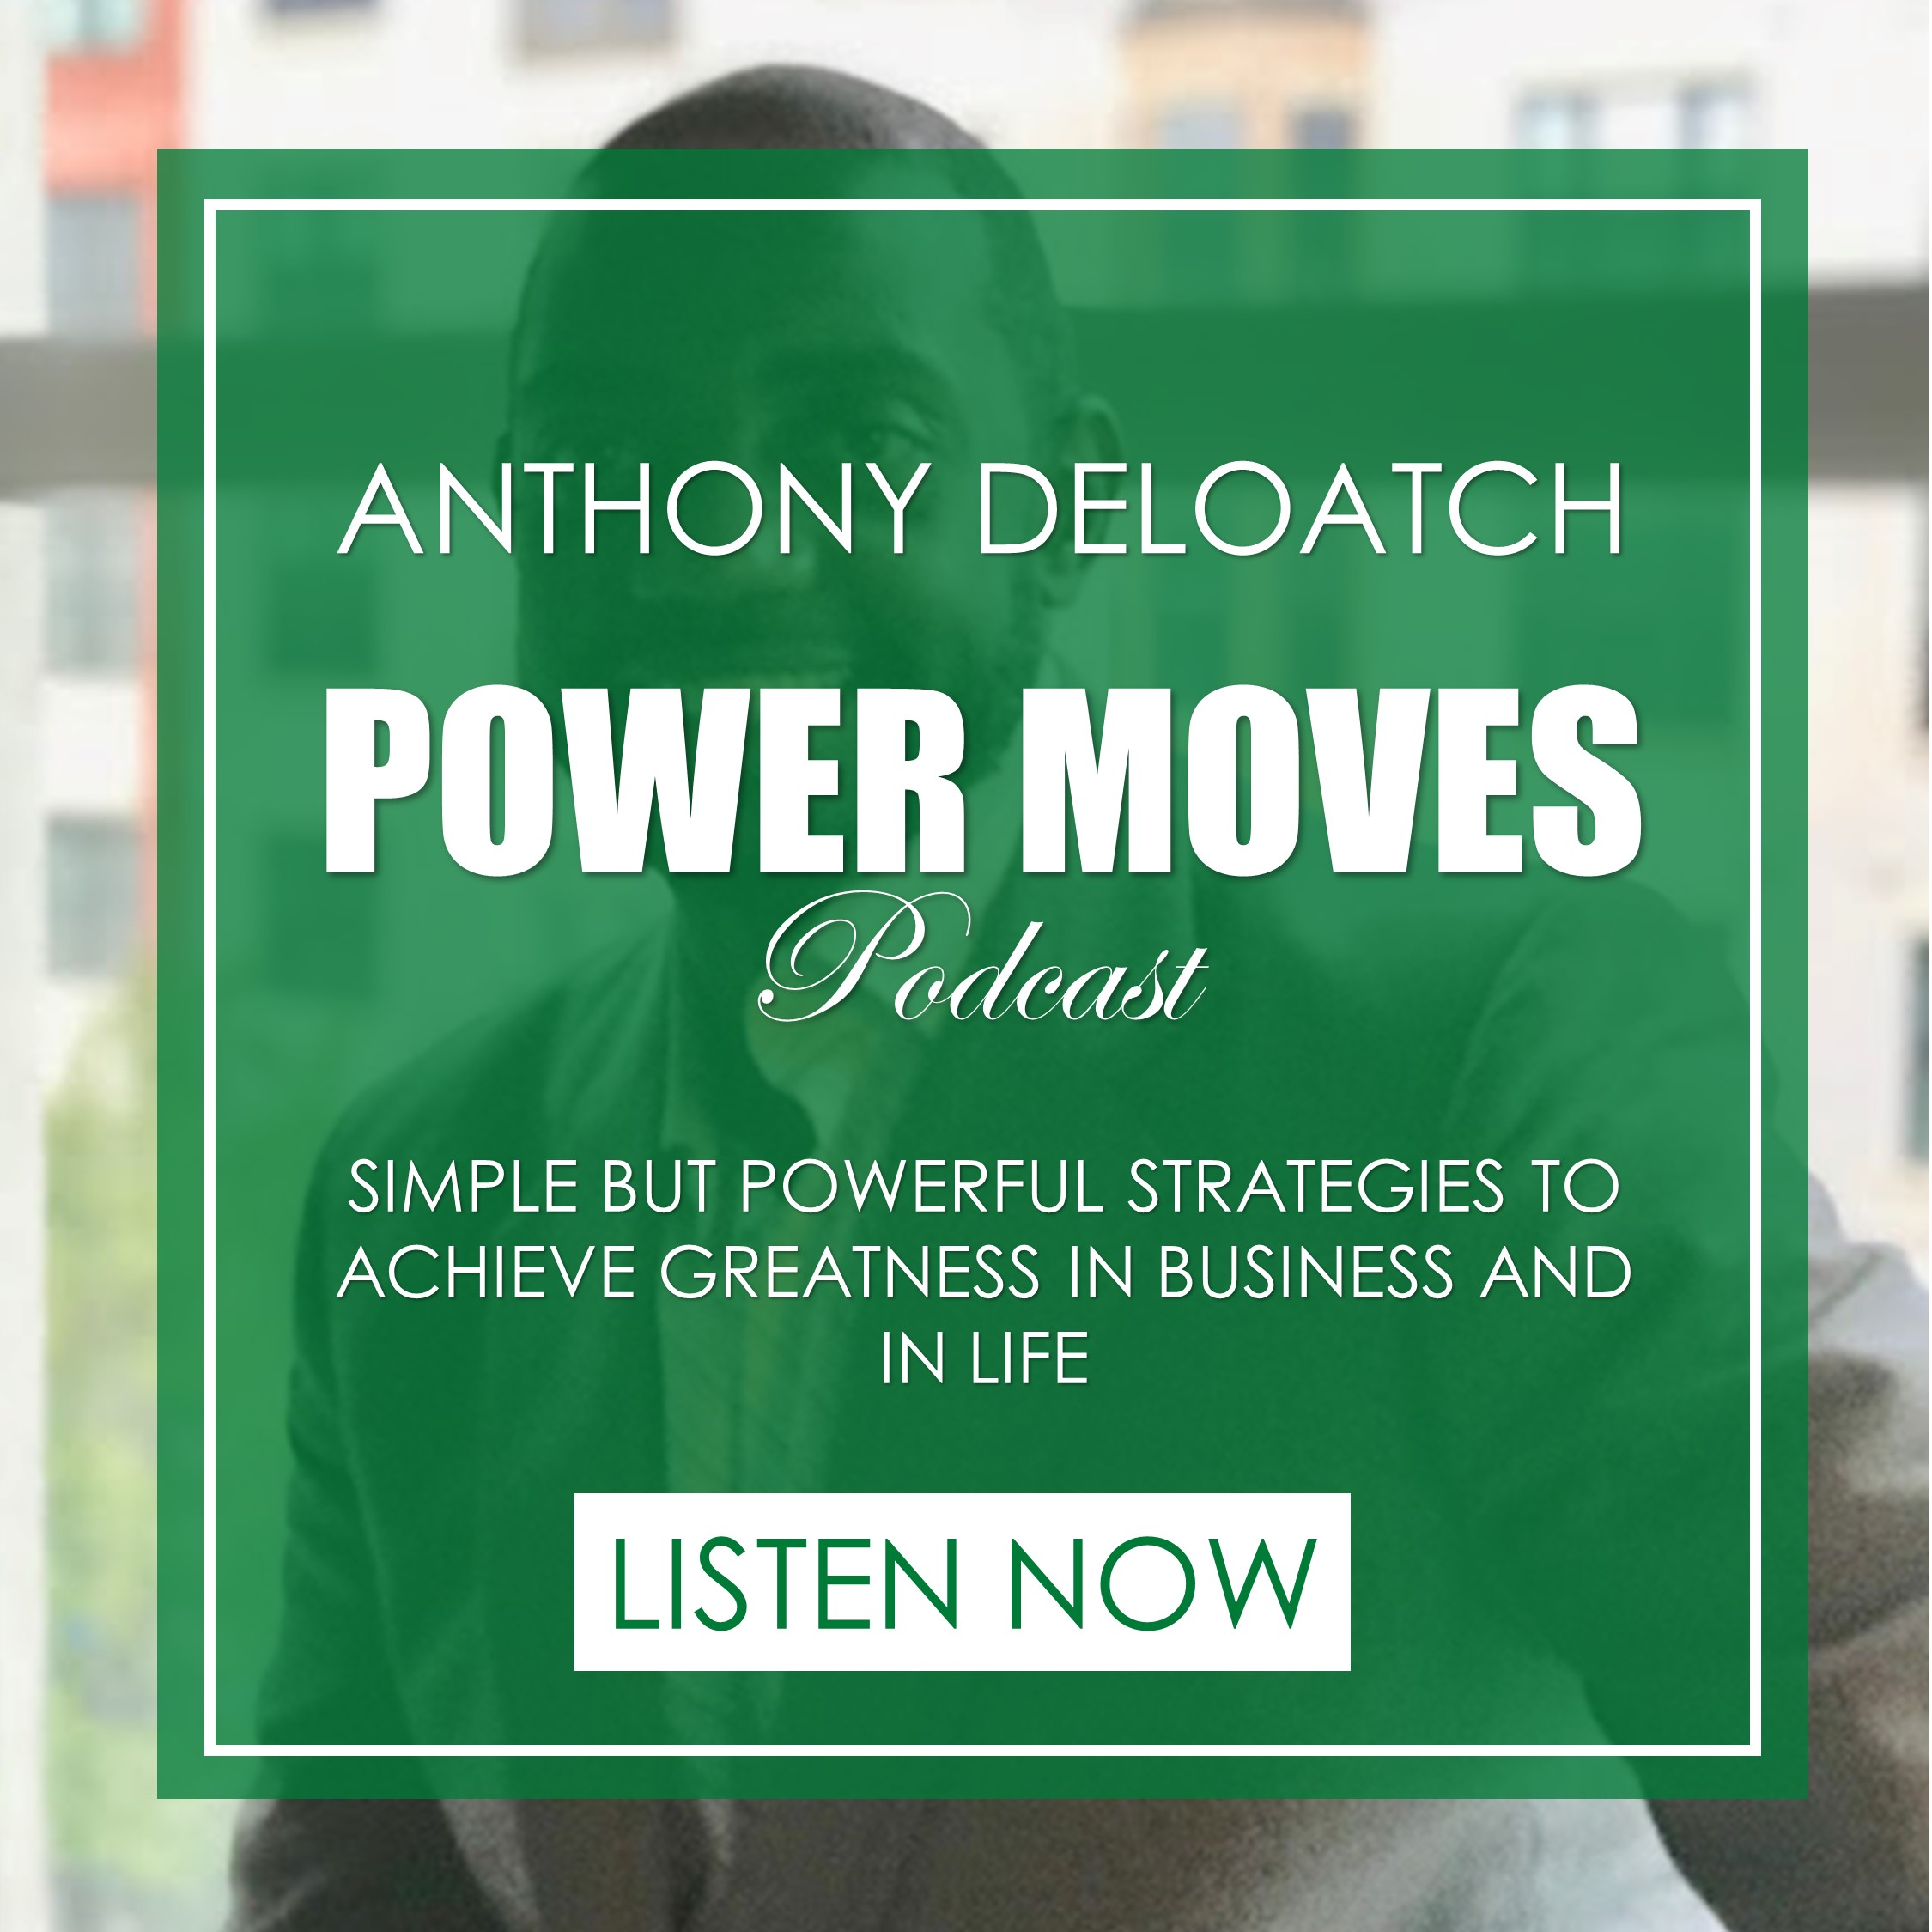 Power Moves Episode 3:  Why You Should Consider Writing Your Own Book